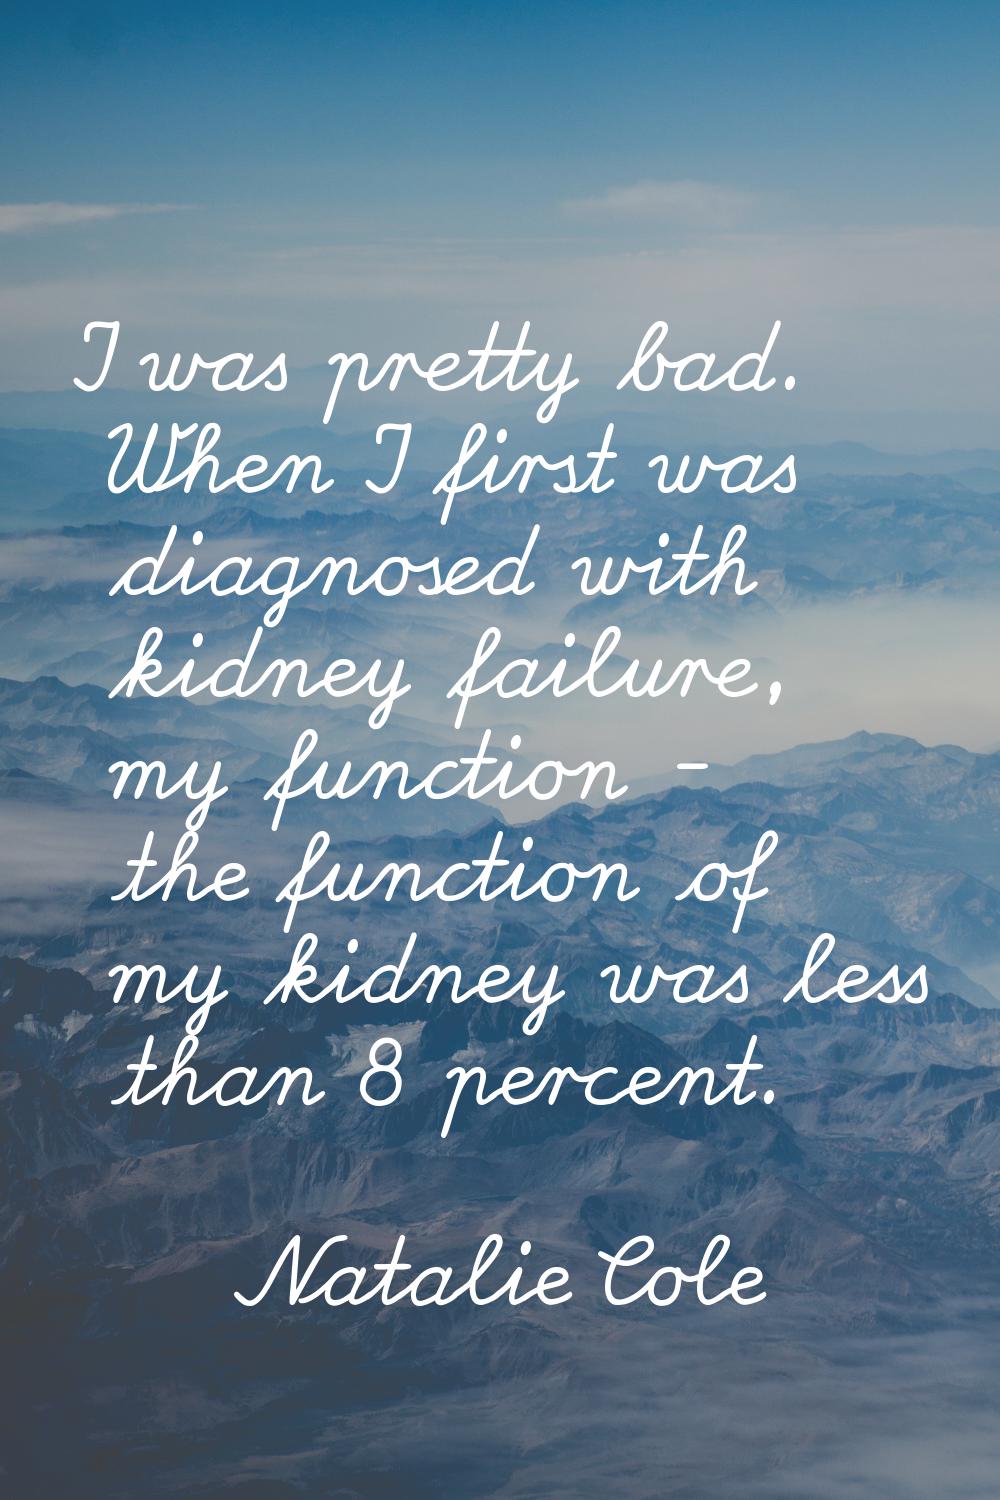 I was pretty bad. When I first was diagnosed with kidney failure, my function - the function of my 